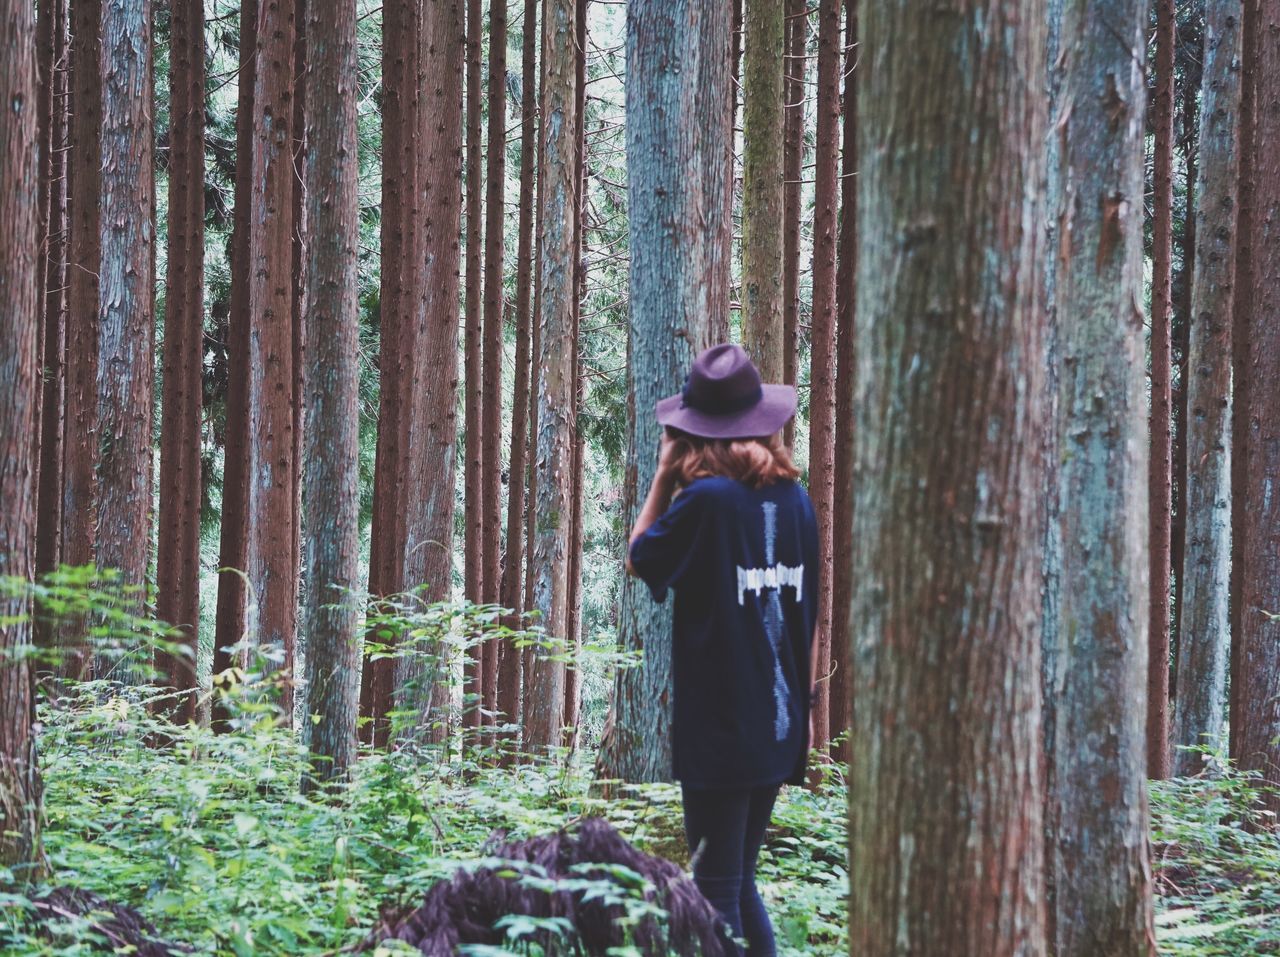 forest, tree trunk, tree, real people, rear view, nature, leisure activity, one person, day, lifestyles, casual clothing, growth, full length, outdoors, beauty in nature, tranquility, hugging, scenics, standing, landscape, men, young adult, people